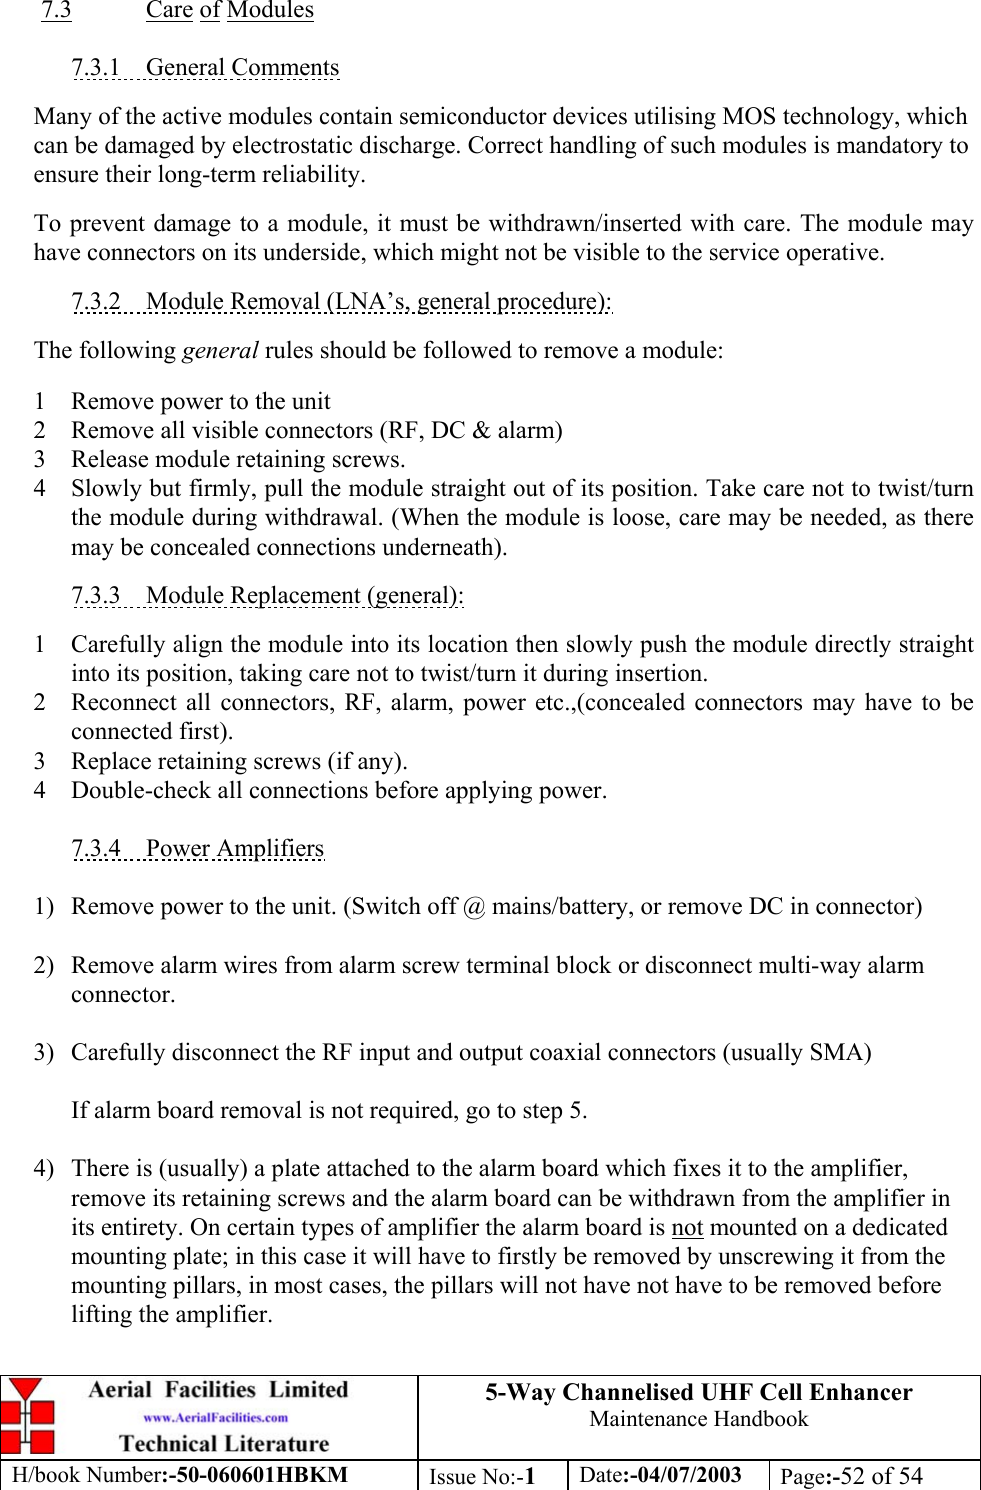 5-Way Channelised UHF Cell EnhancerMaintenance HandbookH/book Number:-50-060601HBKM Issue No:-1Date:-04/07/2003 Page:-52 of 547.3 Care of Modules7.3.1    General CommentsMany of the active modules contain semiconductor devices utilising MOS technology, whichcan be damaged by electrostatic discharge. Correct handling of such modules is mandatory toensure their long-term reliability.To prevent damage to a module, it must be withdrawn/inserted with care. The module mayhave connectors on its underside, which might not be visible to the service operative.7.3.2    Module Removal (LNA’s, general procedure):The following general rules should be followed to remove a module:1 Remove power to the unit2 Remove all visible connectors (RF, DC &amp; alarm)3 Release module retaining screws.4 Slowly but firmly, pull the module straight out of its position. Take care not to twist/turnthe module during withdrawal. (When the module is loose, care may be needed, as theremay be concealed connections underneath).7.3.3    Module Replacement (general):1 Carefully align the module into its location then slowly push the module directly straightinto its position, taking care not to twist/turn it during insertion.2 Reconnect all connectors, RF, alarm, power etc.,(concealed connectors may have to beconnected first).3 Replace retaining screws (if any).4 Double-check all connections before applying power.7.3.4    Power Amplifiers1) Remove power to the unit. (Switch off @ mains/battery, or remove DC in connector)2) Remove alarm wires from alarm screw terminal block or disconnect multi-way alarmconnector.3) Carefully disconnect the RF input and output coaxial connectors (usually SMA)If alarm board removal is not required, go to step 5.4) There is (usually) a plate attached to the alarm board which fixes it to the amplifier,remove its retaining screws and the alarm board can be withdrawn from the amplifier inits entirety. On certain types of amplifier the alarm board is not mounted on a dedicatedmounting plate; in this case it will have to firstly be removed by unscrewing it from themounting pillars, in most cases, the pillars will not have not have to be removed beforelifting the amplifier.